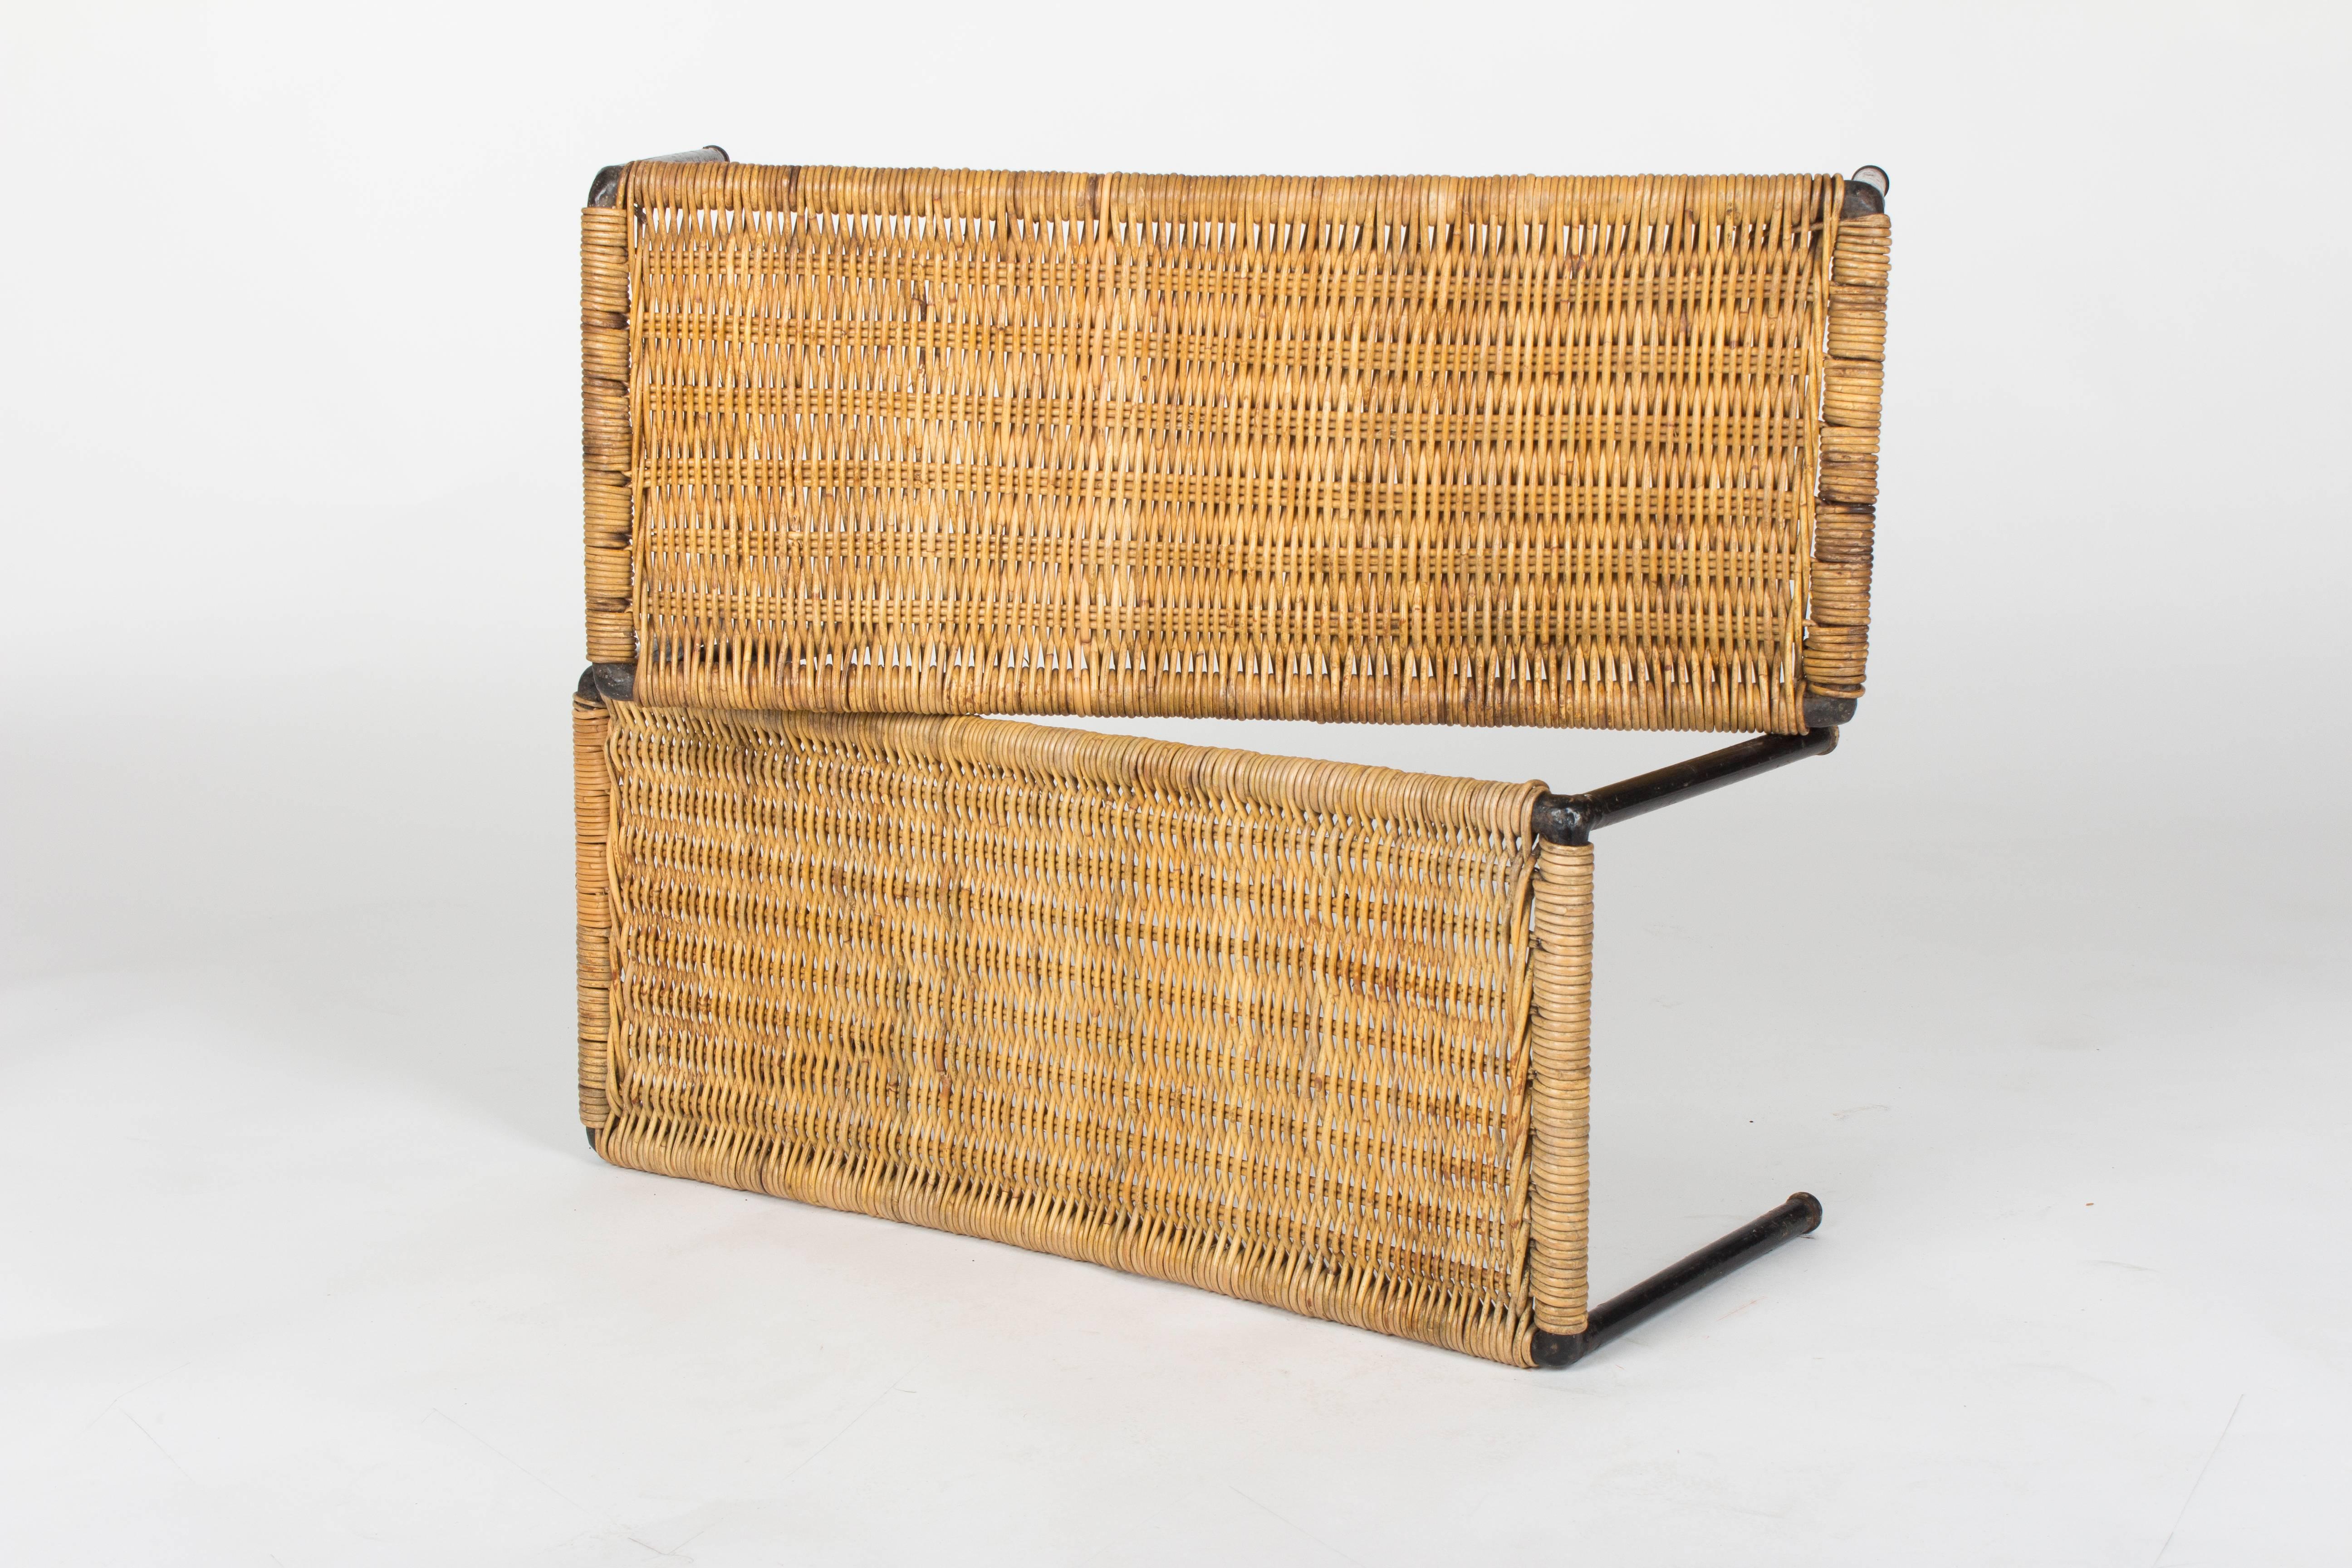 Rare Pair of Early Auböck Wicker Side Tables, Vienna, 1950s For Sale 2